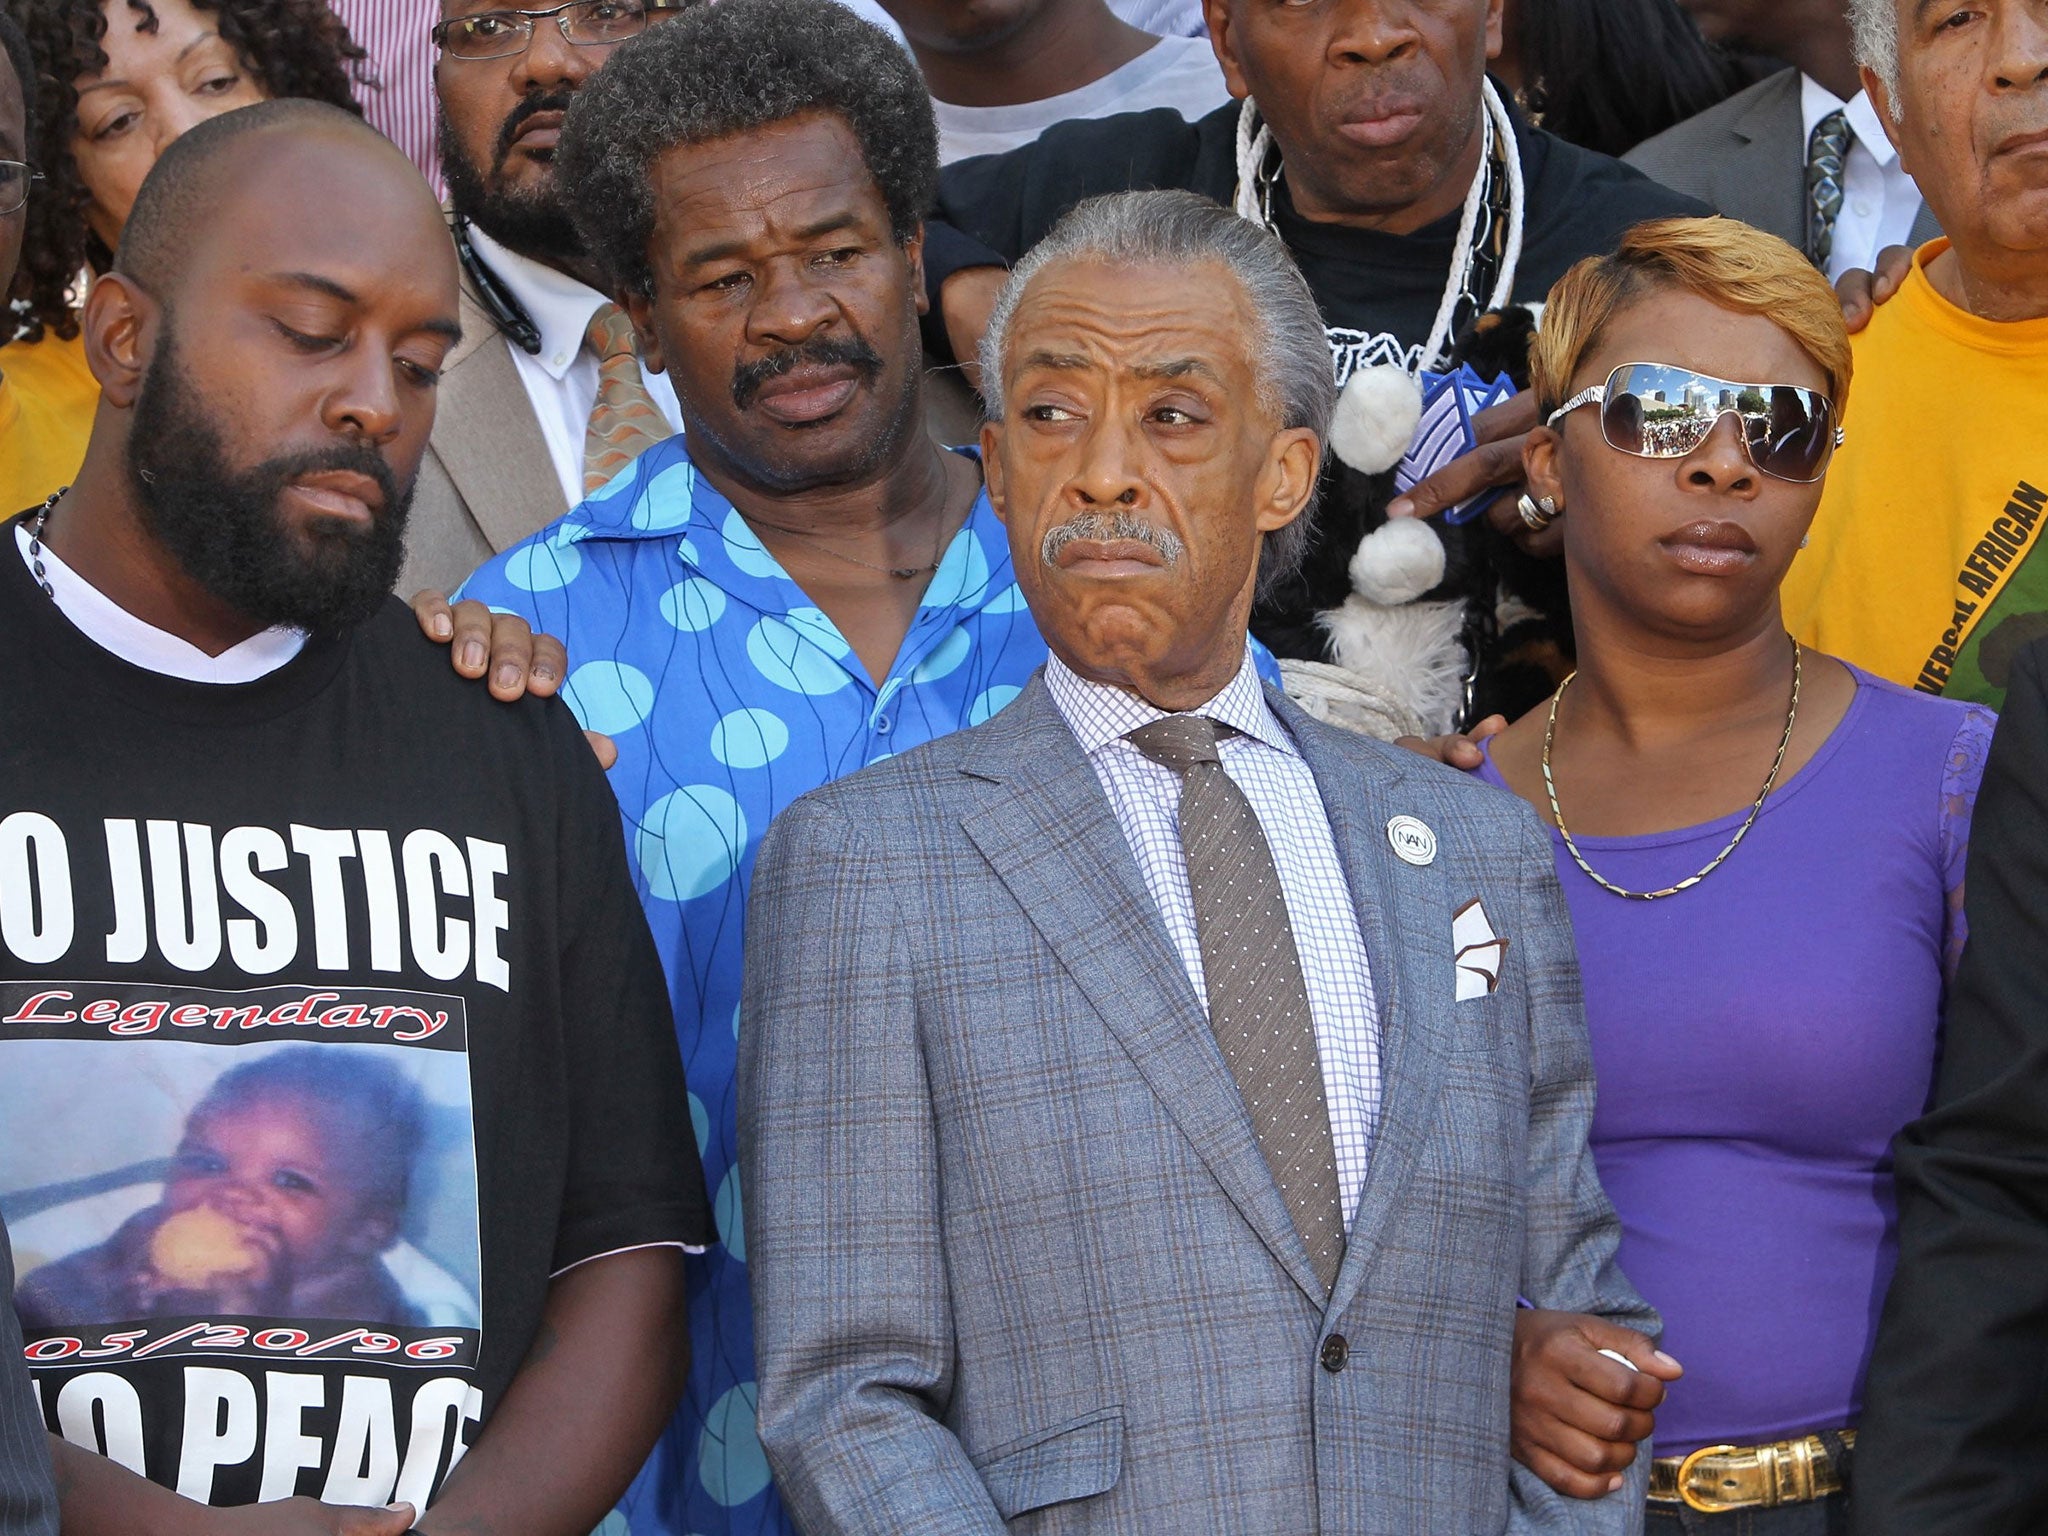 Michael Brown’s parents, Michael Brown Sr., left, and
Lesley McSpadden, right, stand next to the Rev Al
Sharpton in St Louis on Tuesday